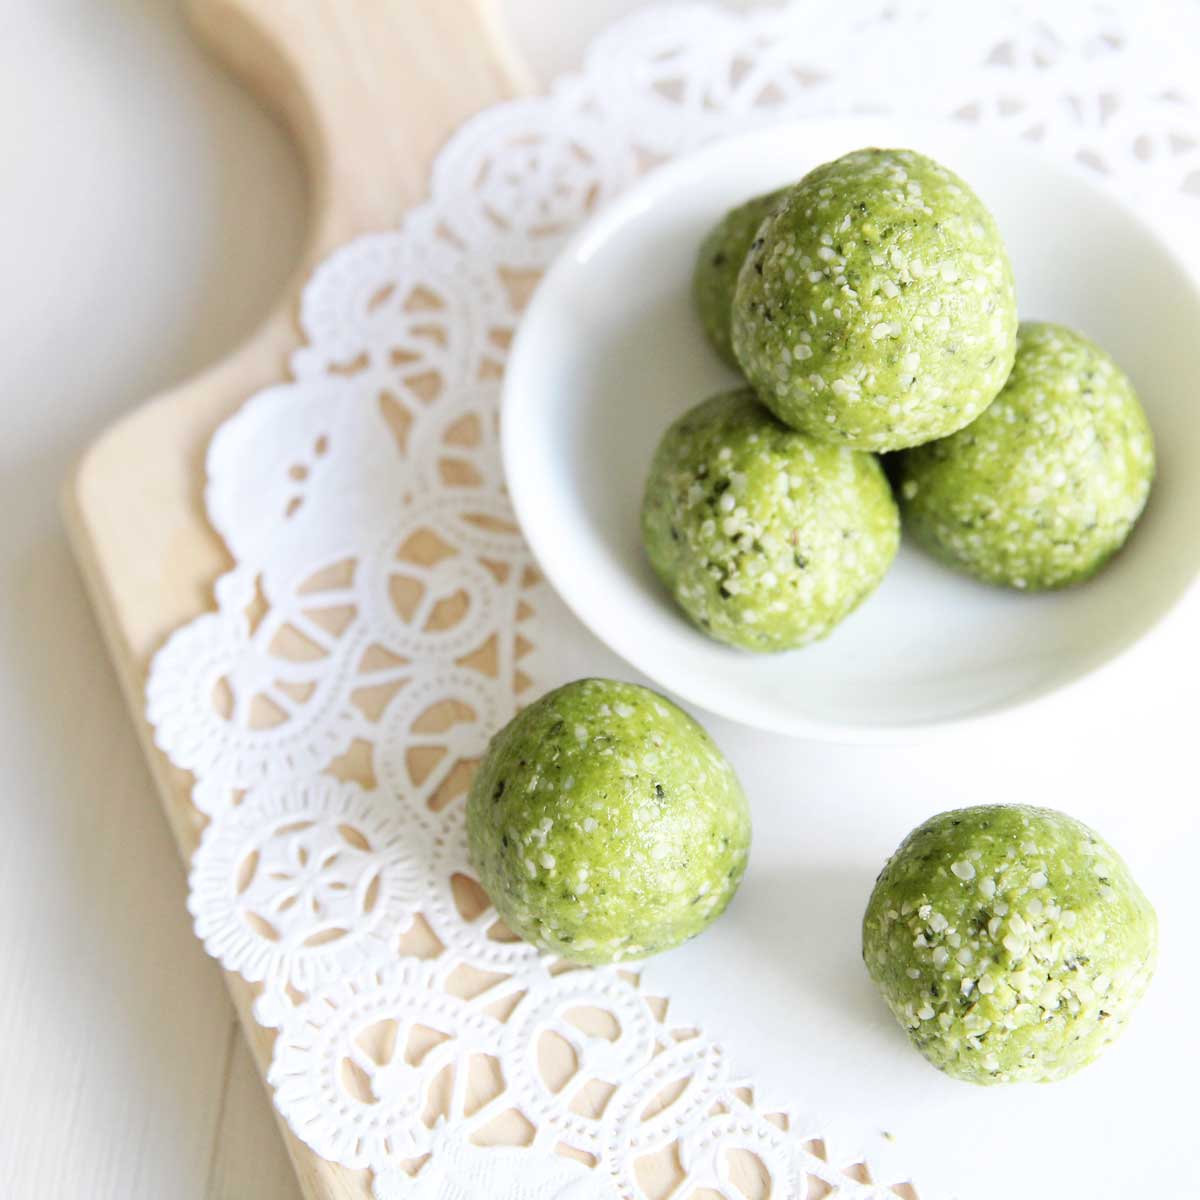 Power Packed Matcha Latte Protein Balls Recipe with Collagen Peptides - Collagen Peptides